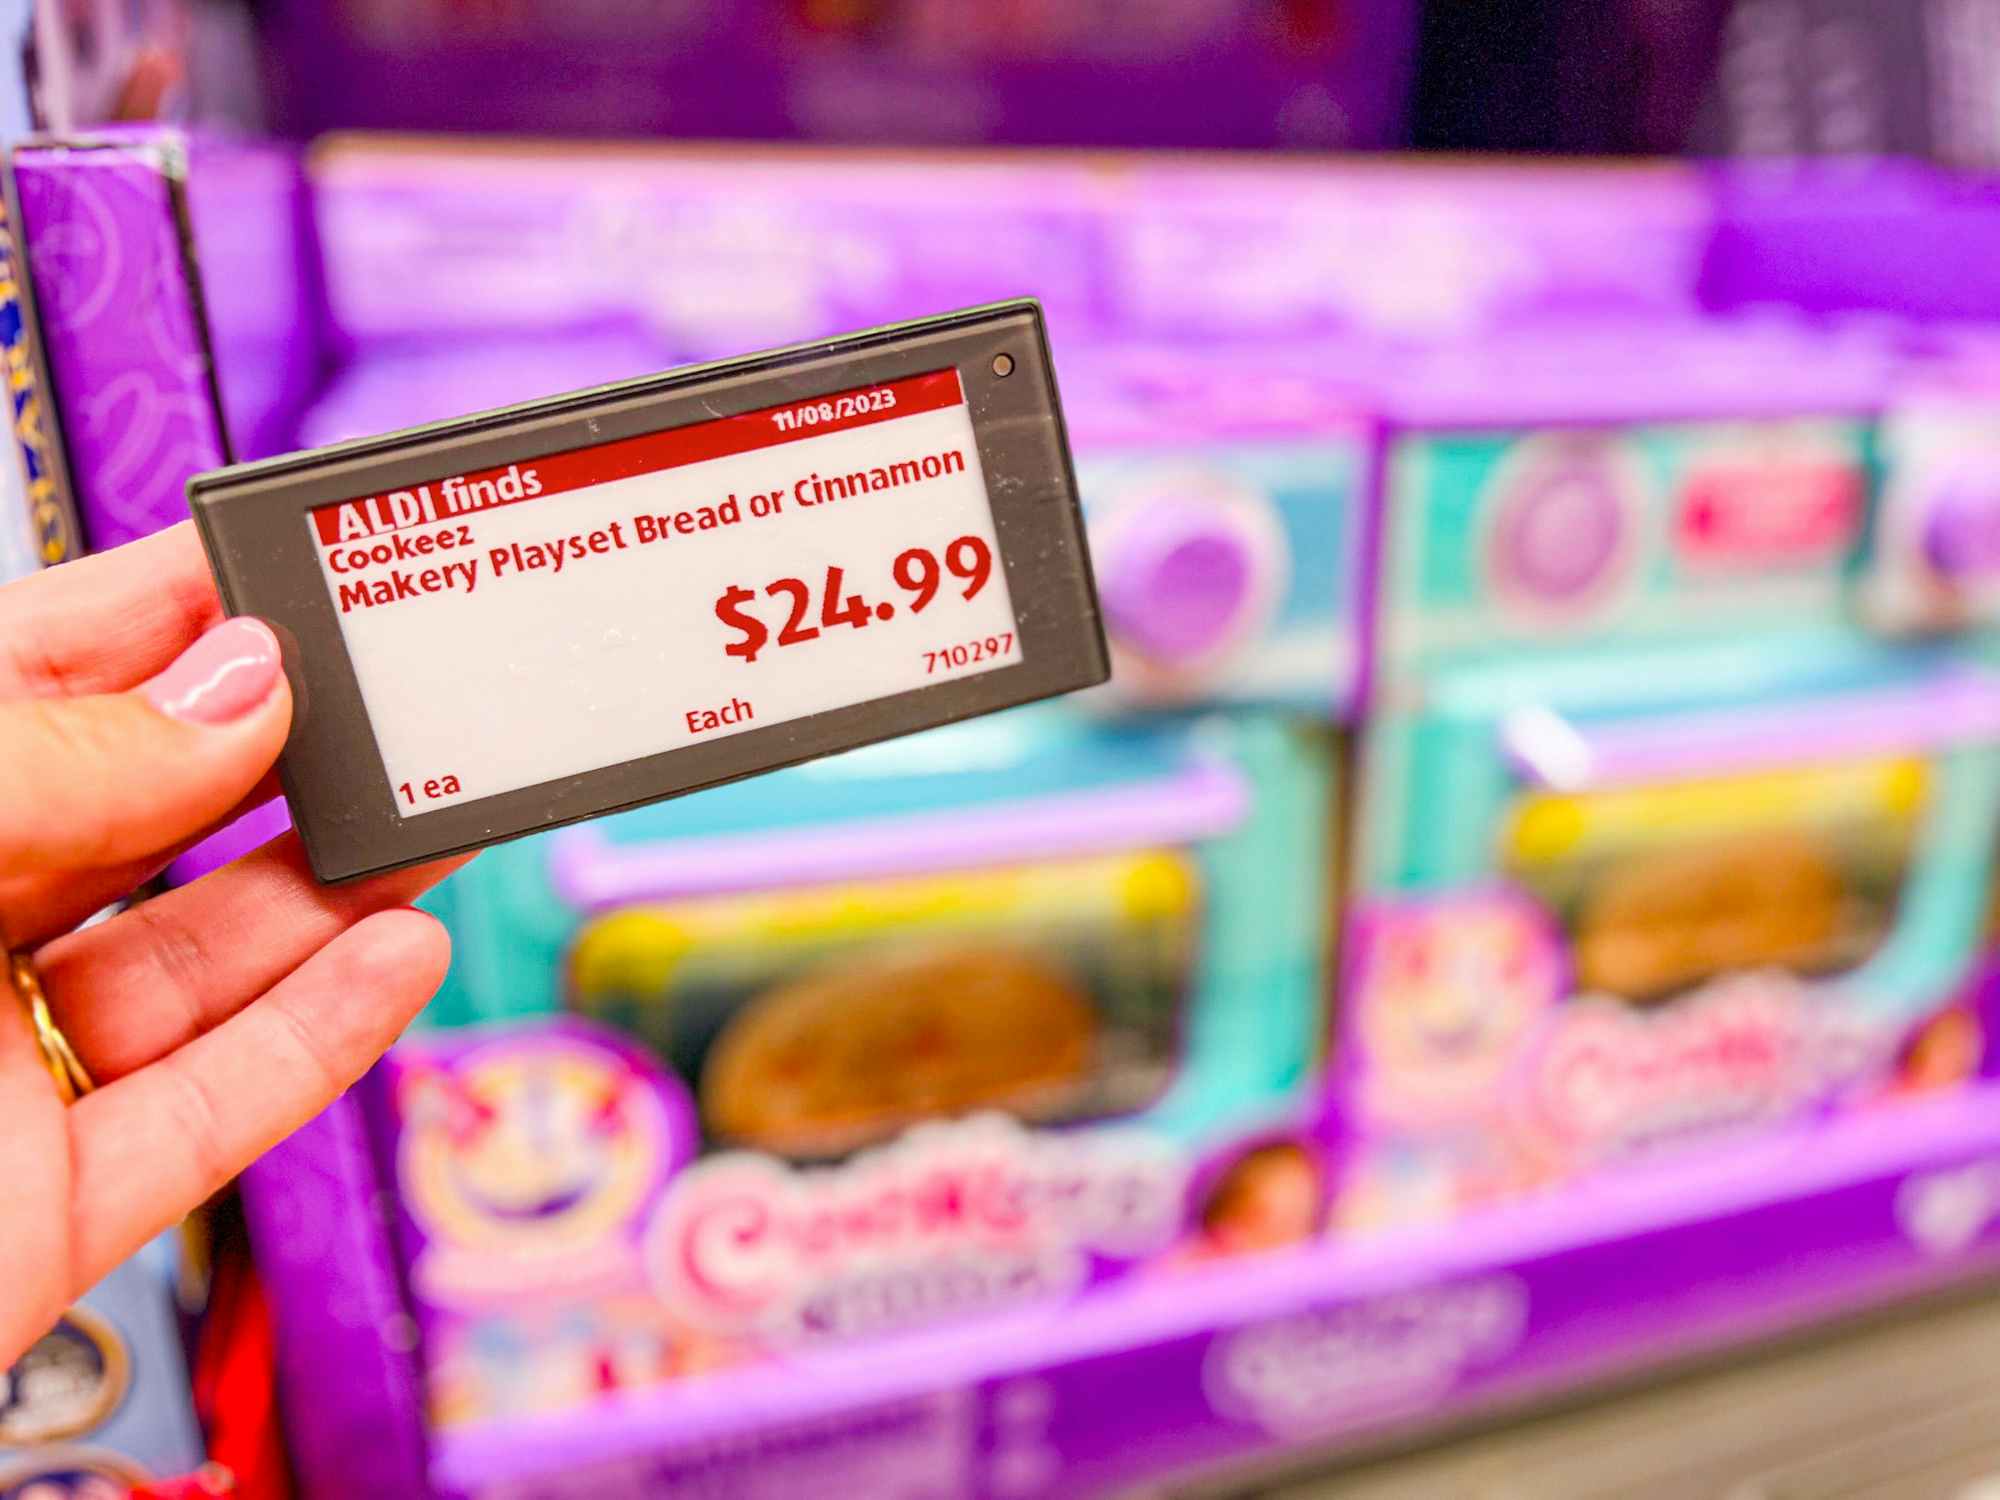 the price tag for Cookeez Makery toys at Aldi